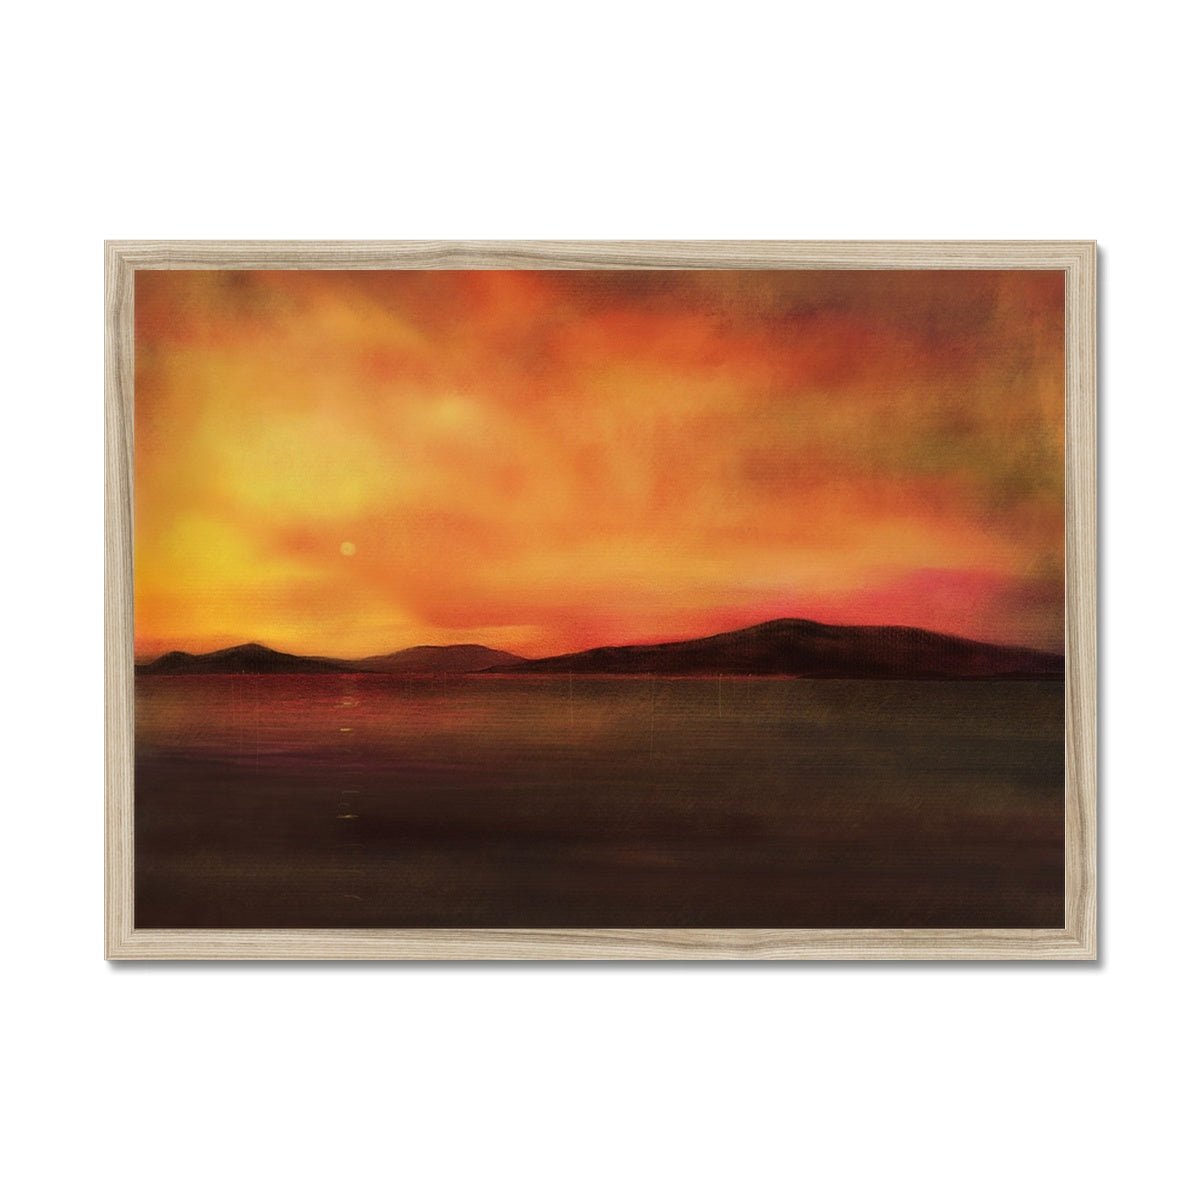 Isle Of Harris Sunset Painting | Framed Prints From Scotland-Framed Prints-Hebridean Islands Art Gallery-A2 Landscape-Natural Frame-Paintings, Prints, Homeware, Art Gifts From Scotland By Scottish Artist Kevin Hunter